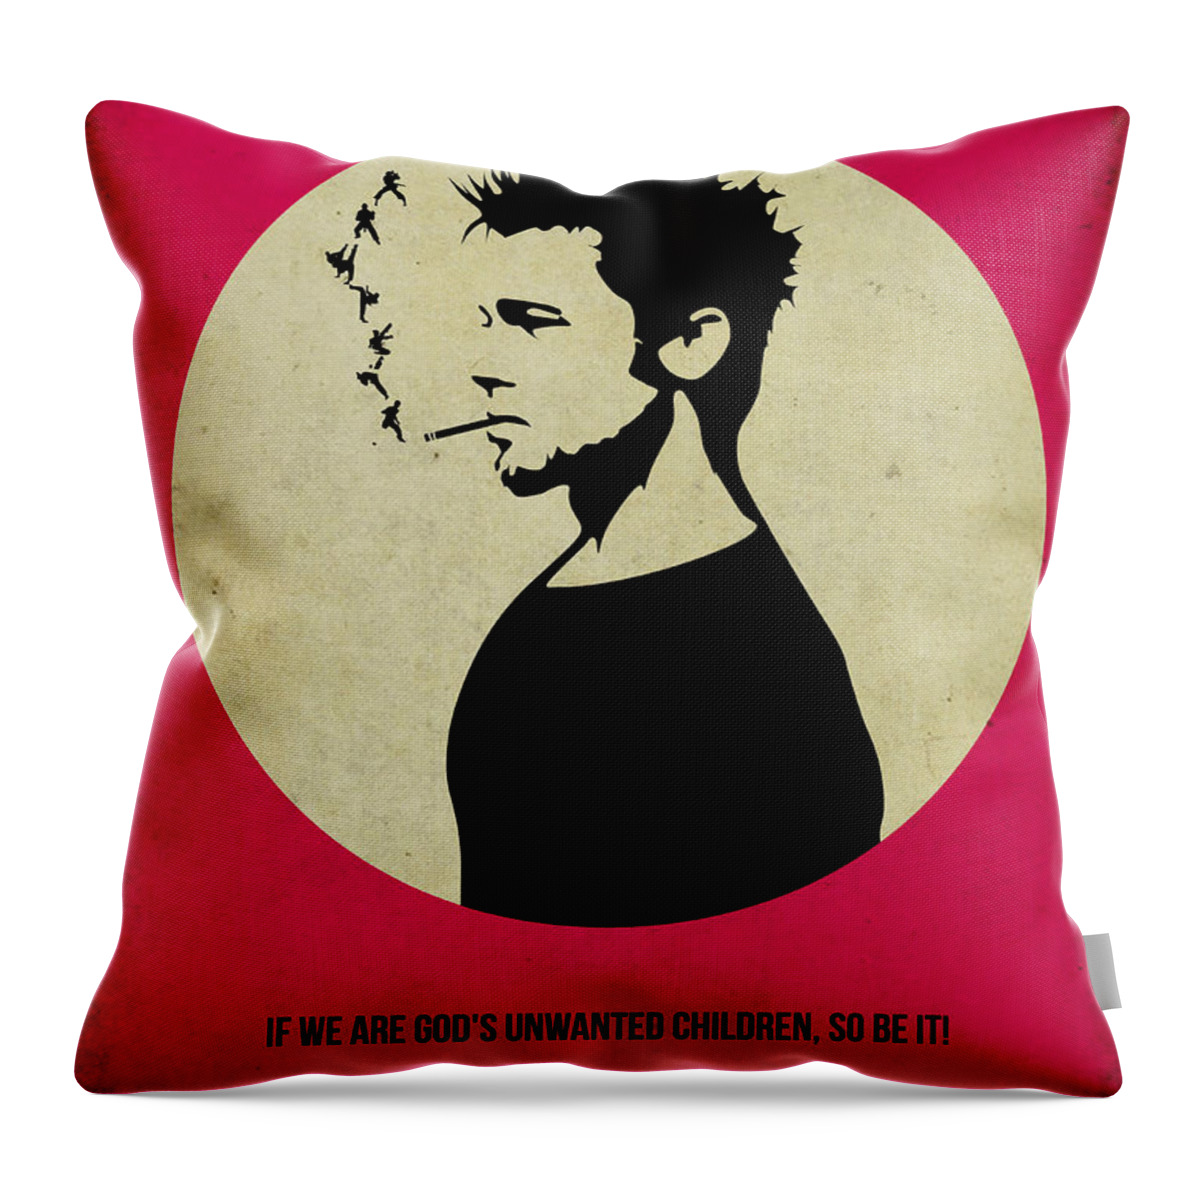  Throw Pillow featuring the painting Fight Club Poster by Naxart Studio